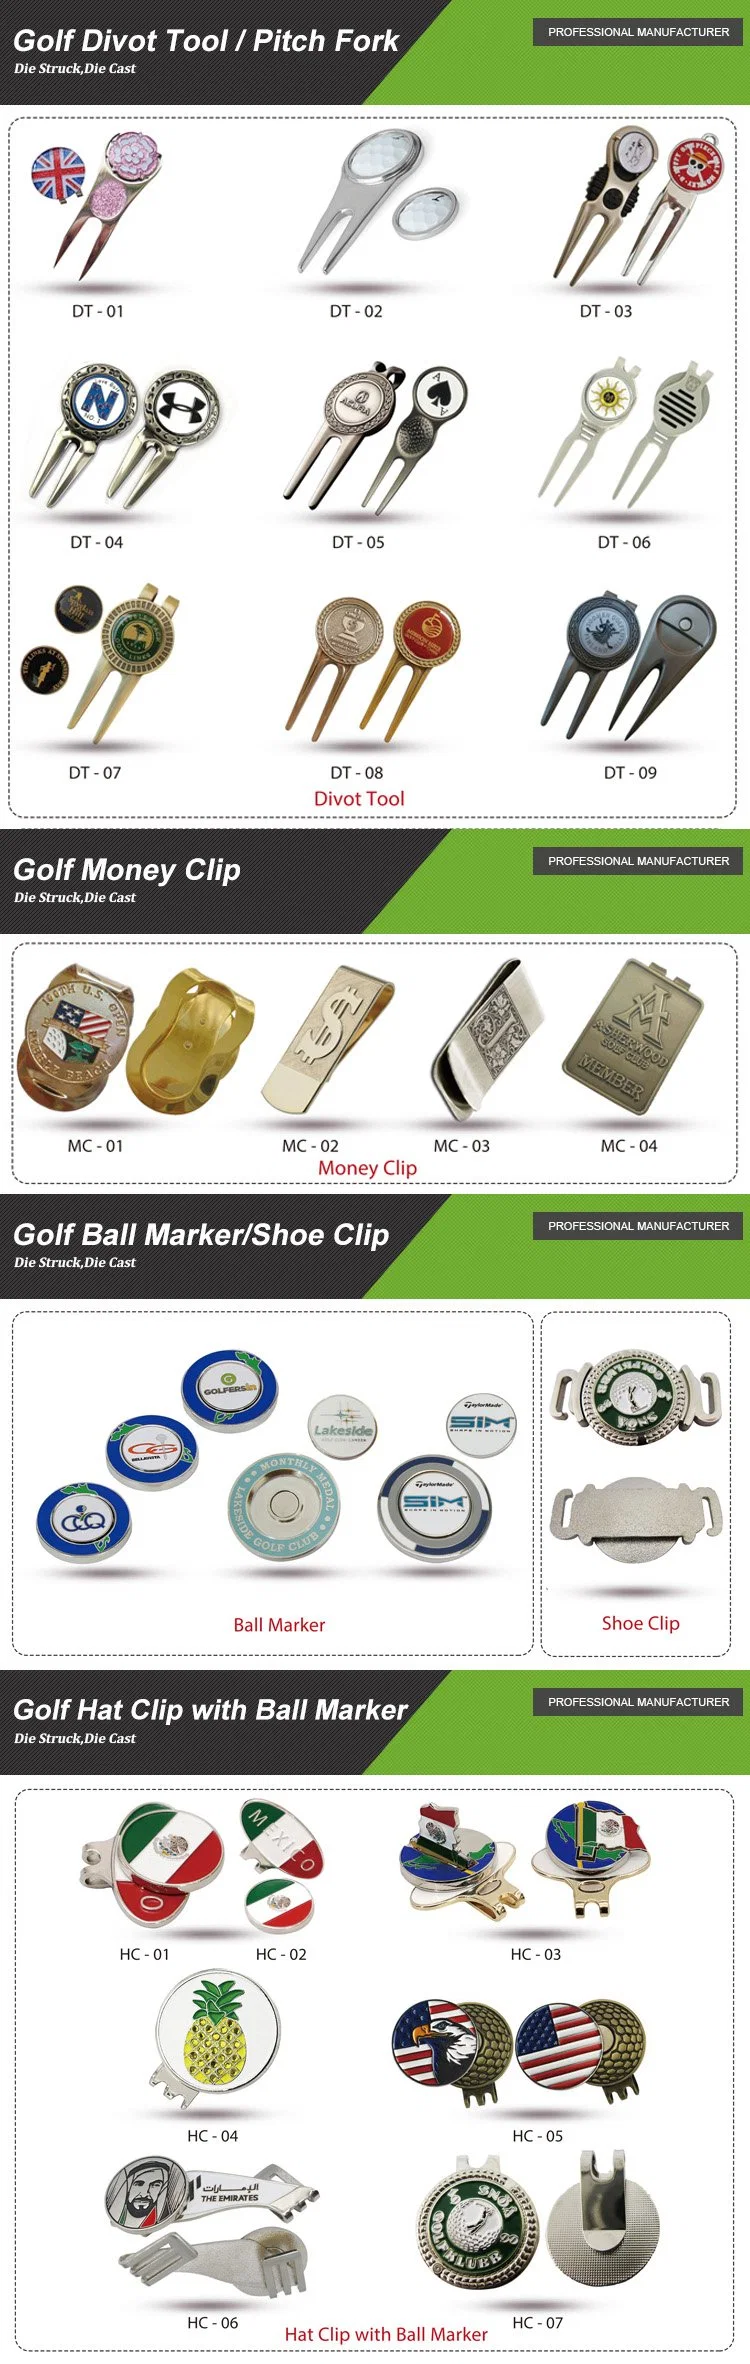 Poker Chip Irons Tee Markers Wedges Putting Mat Launch Monitor Grip Headcovers Forged Custom Blank Magnet Repair Golf Divot Tool